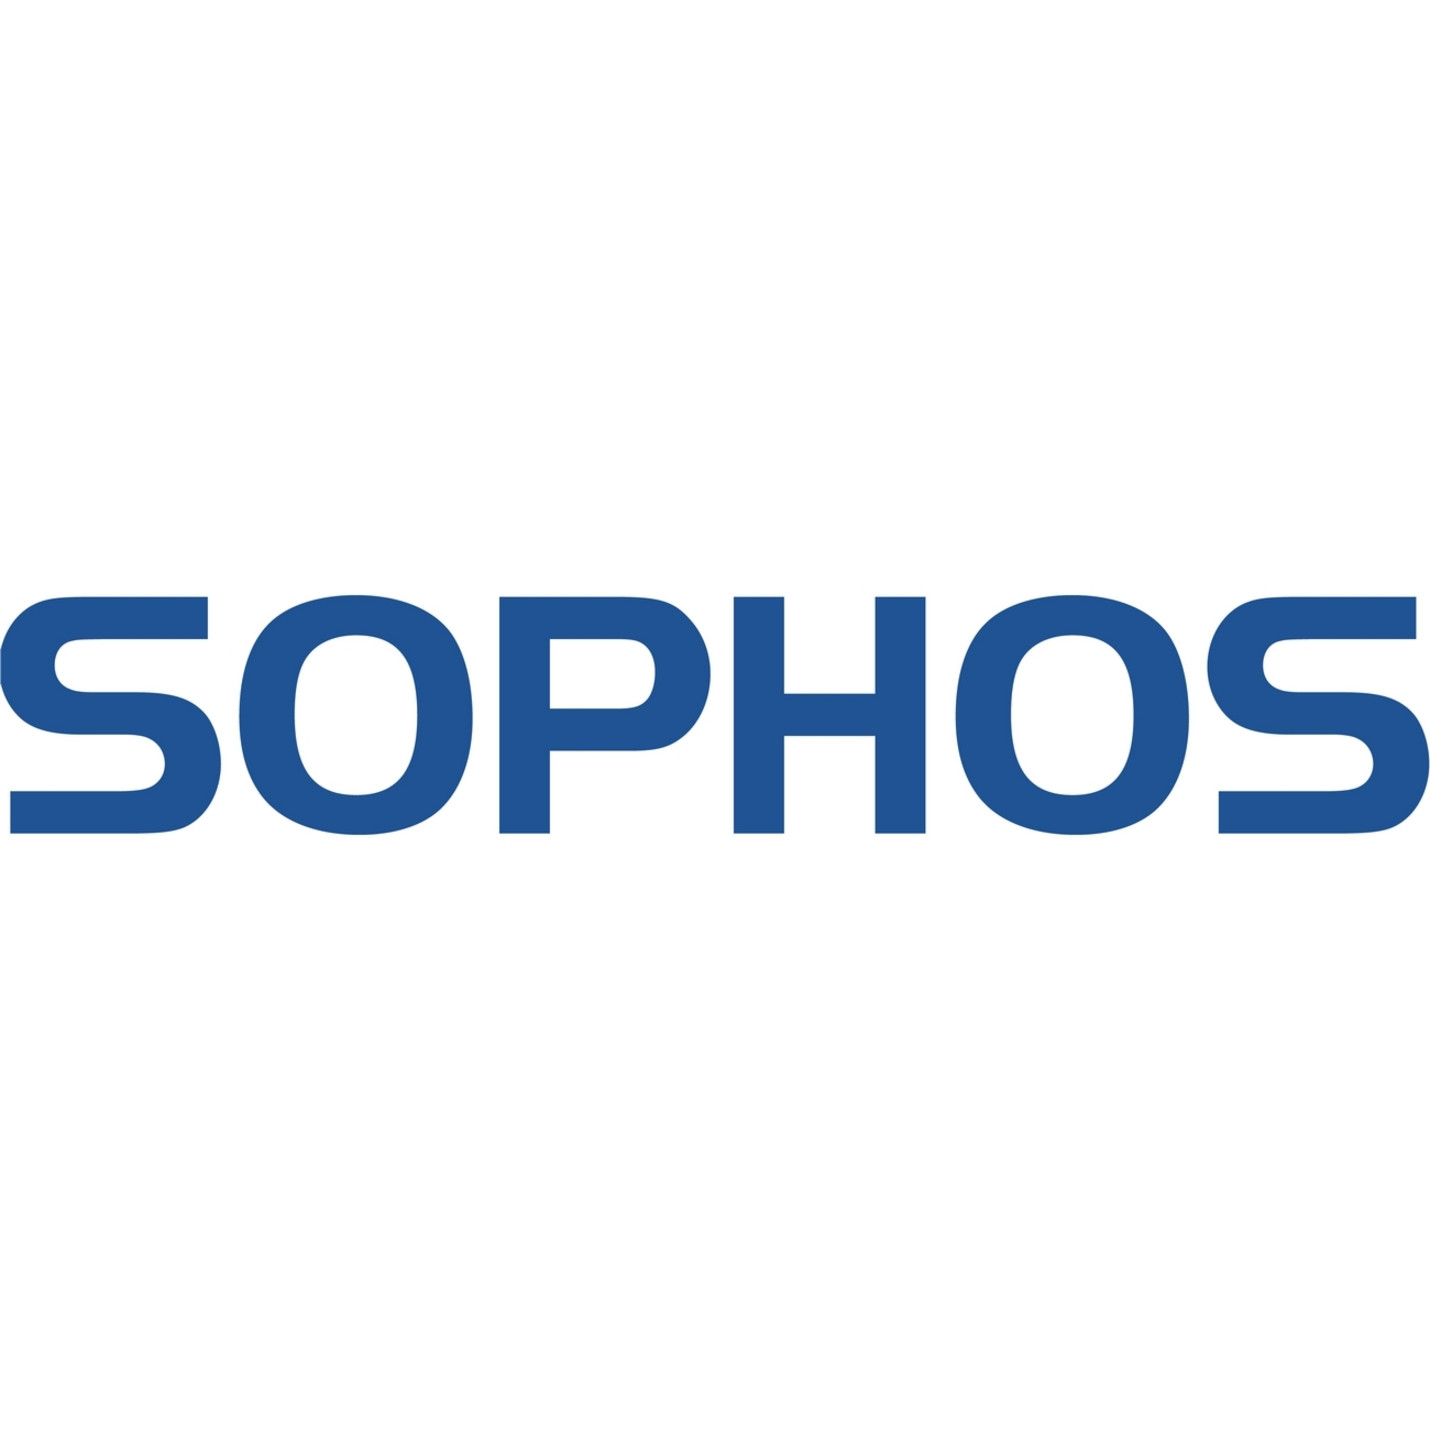 Sophos Cloud Endpoint Protection AdvancedCompetitive Upgrade Subscription License Extension1 MonthGovernment CEAF0GTCU